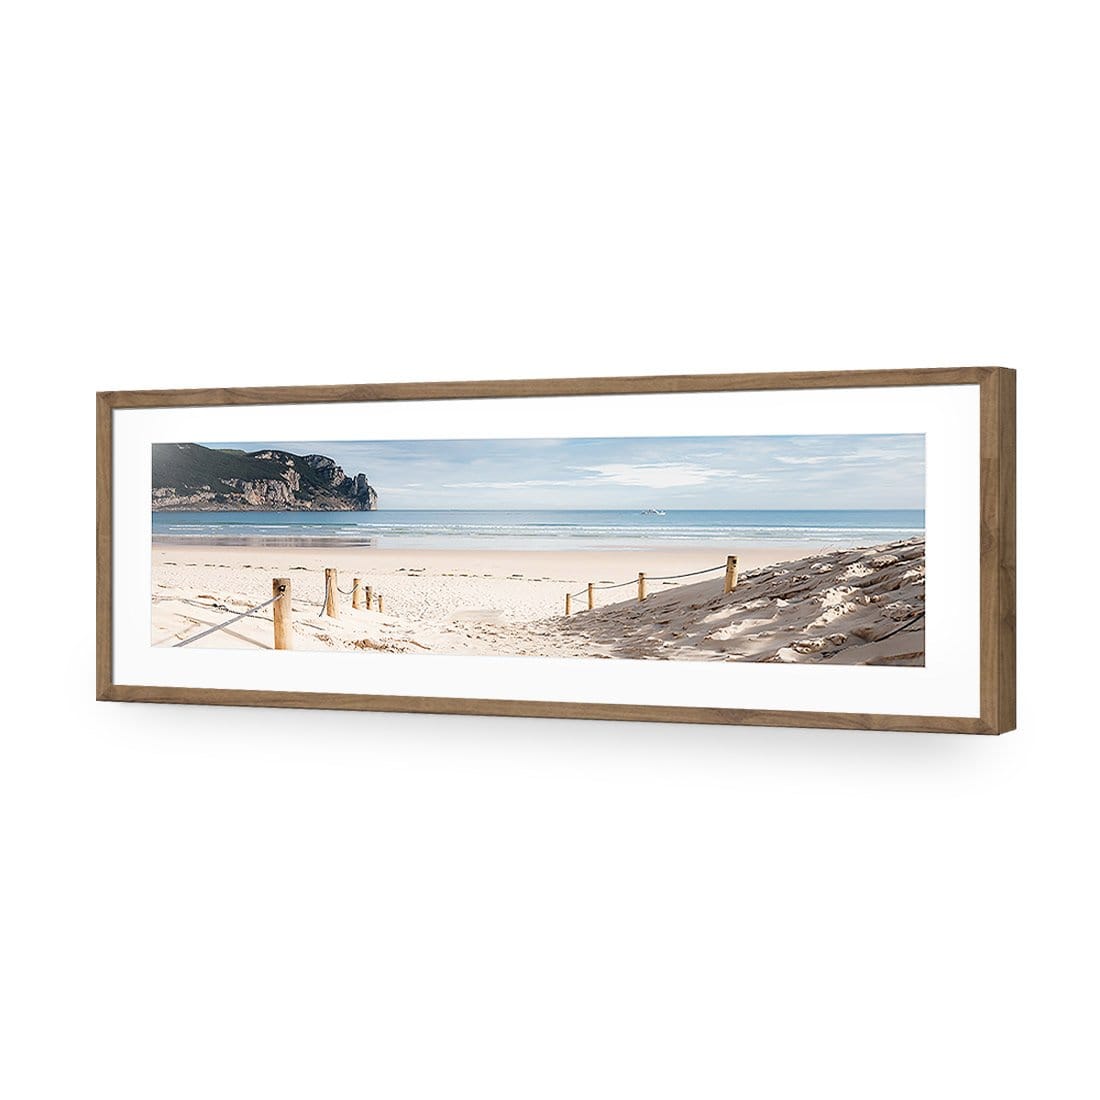 Tranquil Beach, Long-Acrylic-Wall Art Design-Without Border-Acrylic - Natural Frame-60x20cm-Wall Art Designs